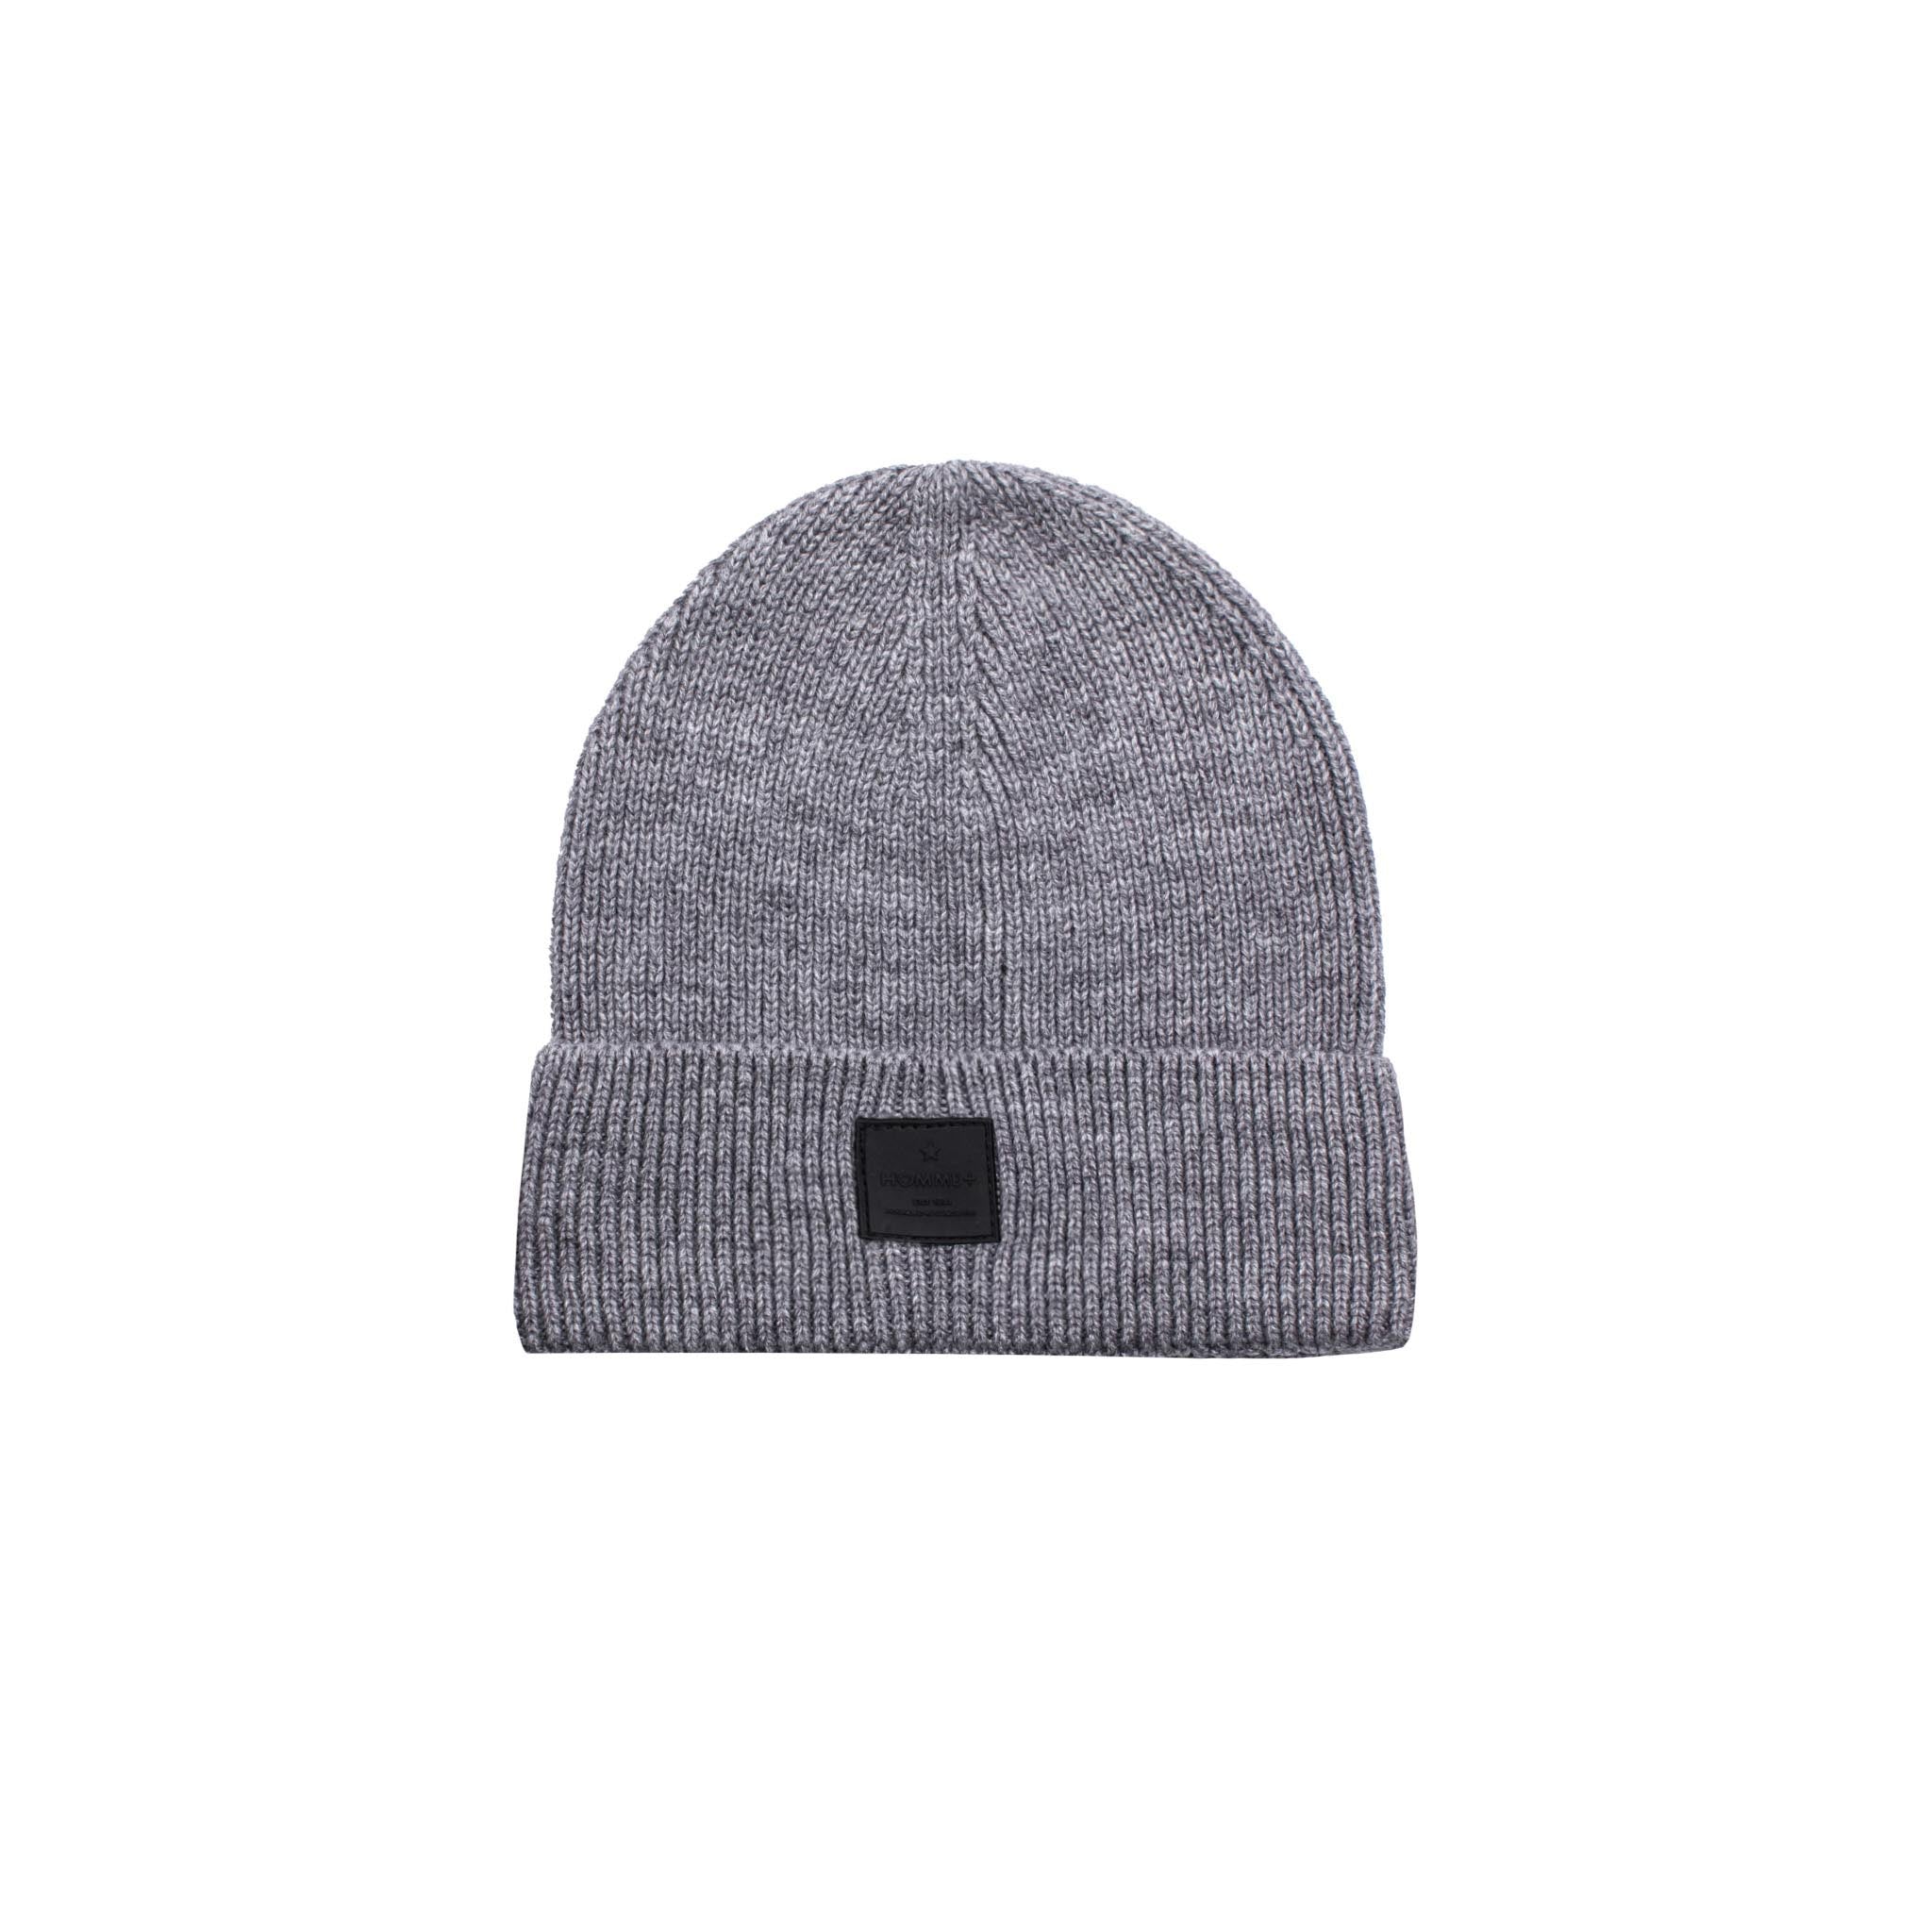 HOMME+ Rubber Patch Beanie Grey